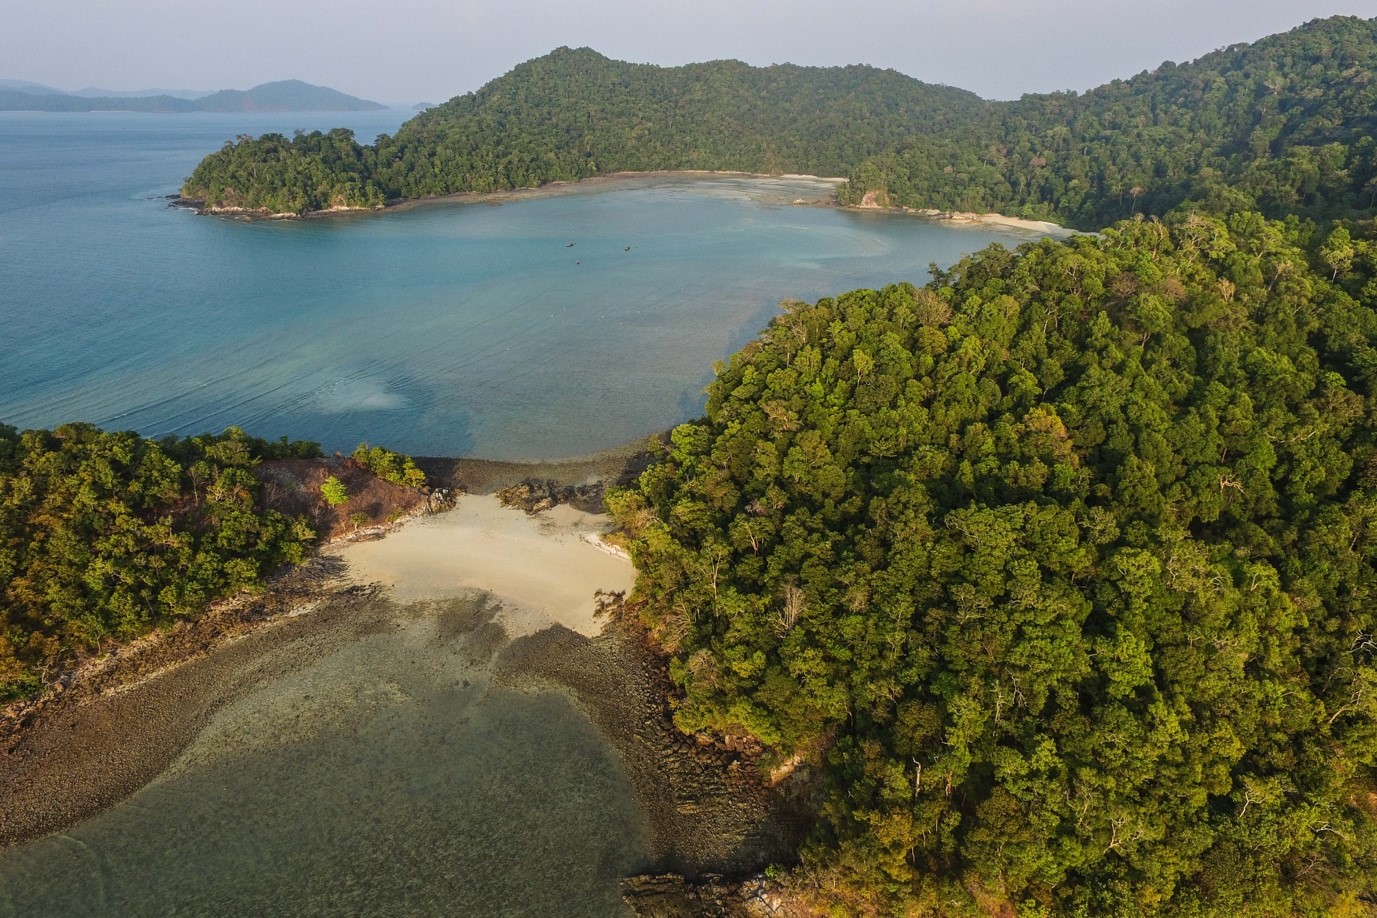 With over 800, forest covered islands, the archipelago was beautiful beyond belief.